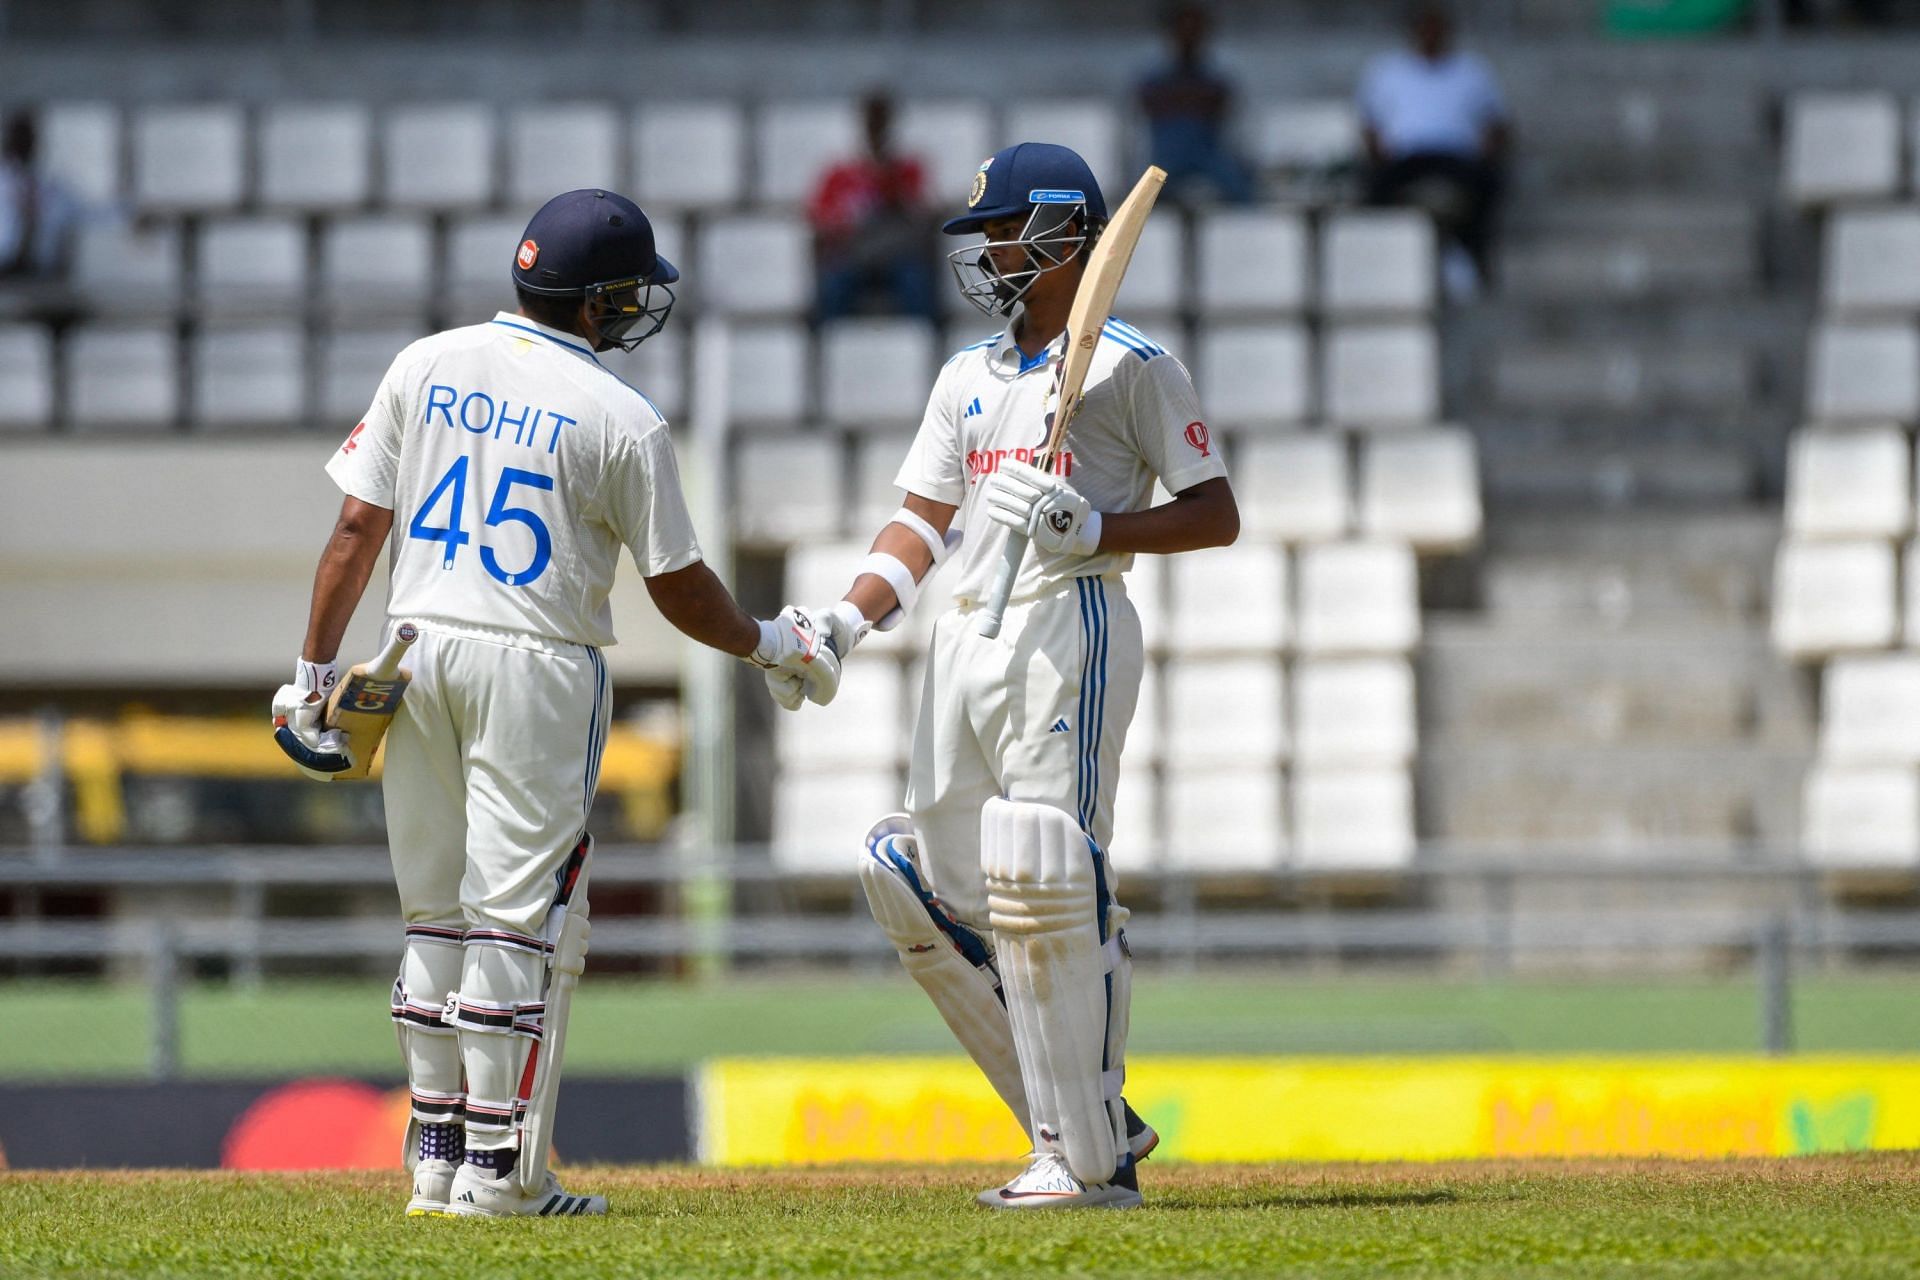 The Indian batters made the most of the West Indies